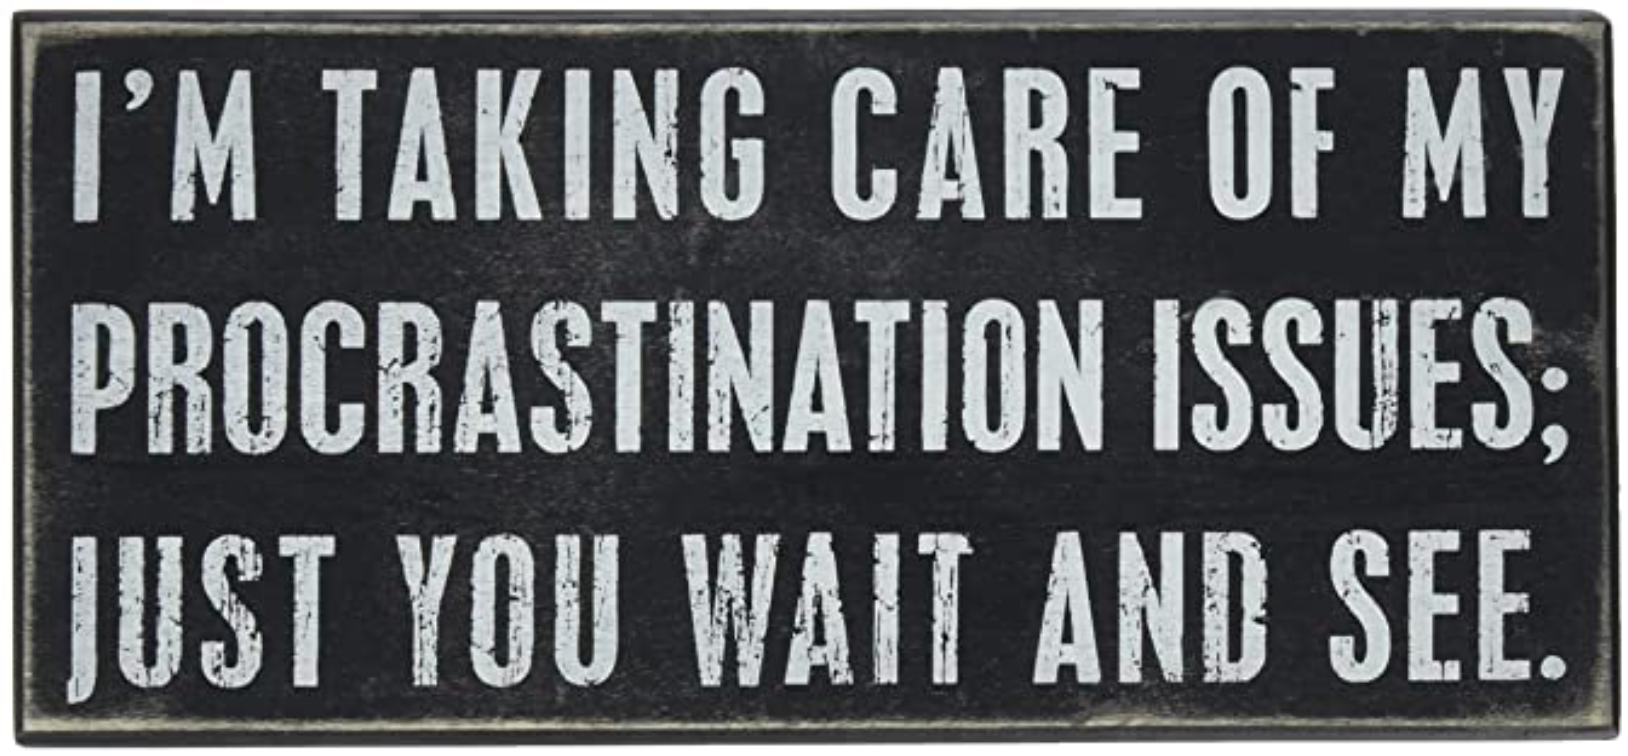 You just wait 1. You just wait. Procrastination quotes. Wait and see. You just wait English.